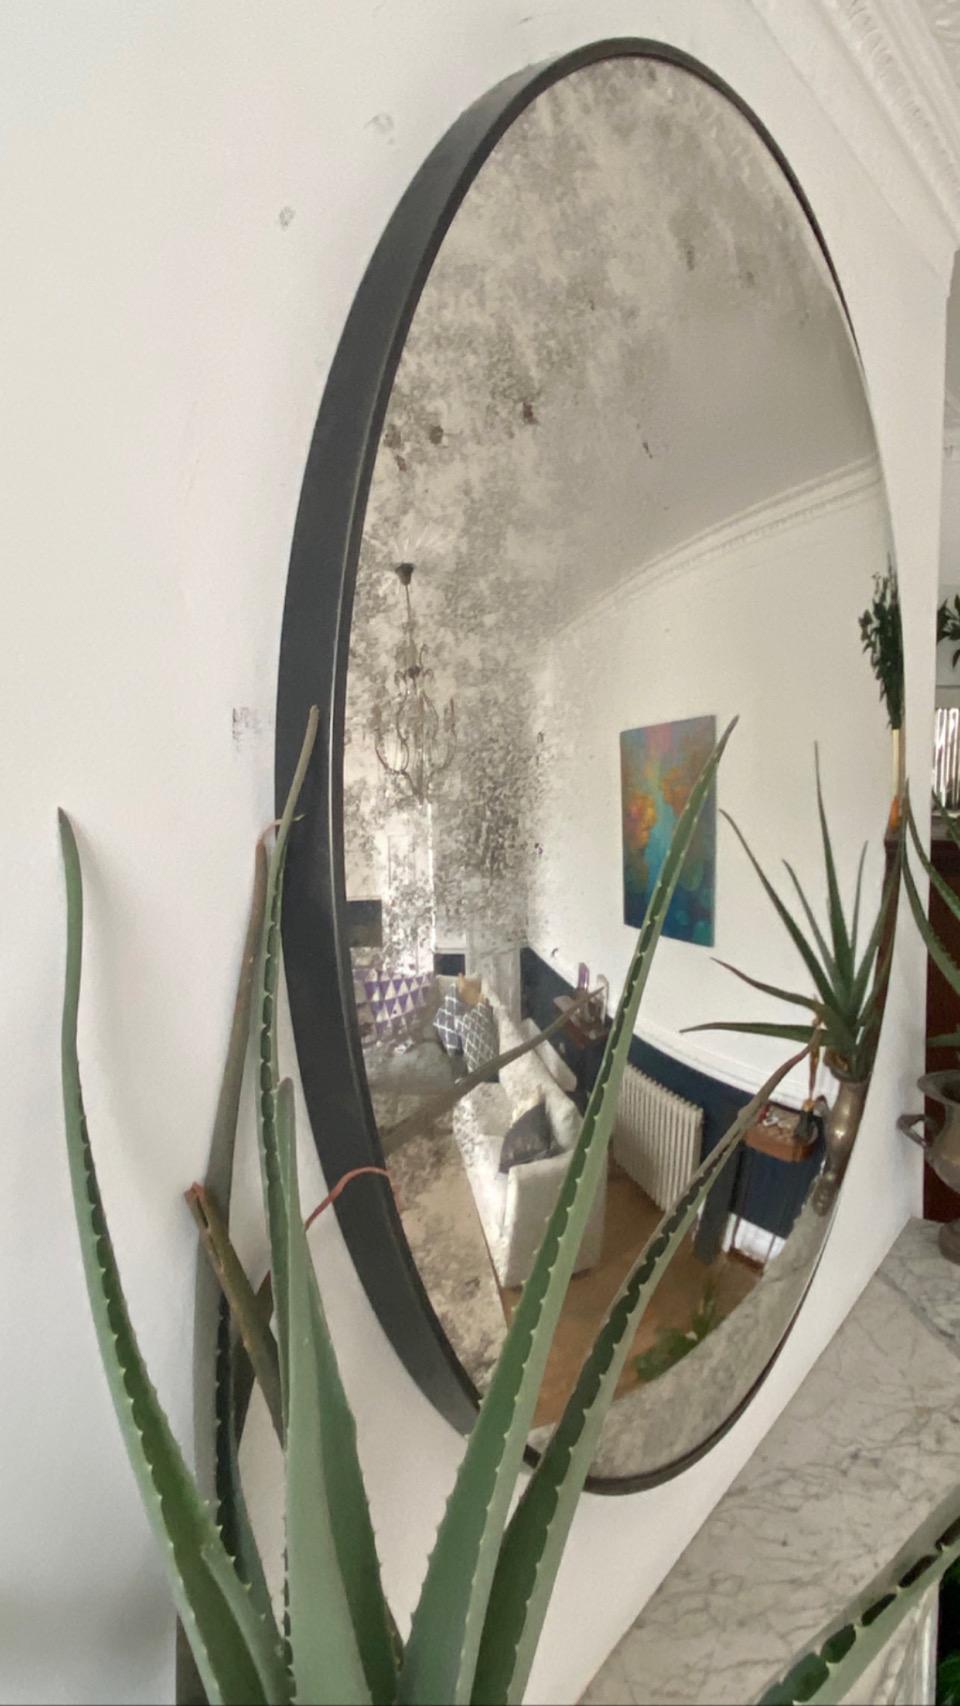 The Ferrara Carbonne is a highly decorative convex wall mirror that creates a focal point and adds elegance to any room. 

The mirror itself is silvered using traditional methods and fabricated from 6mm low iron glass with a curvature of 7 cms.